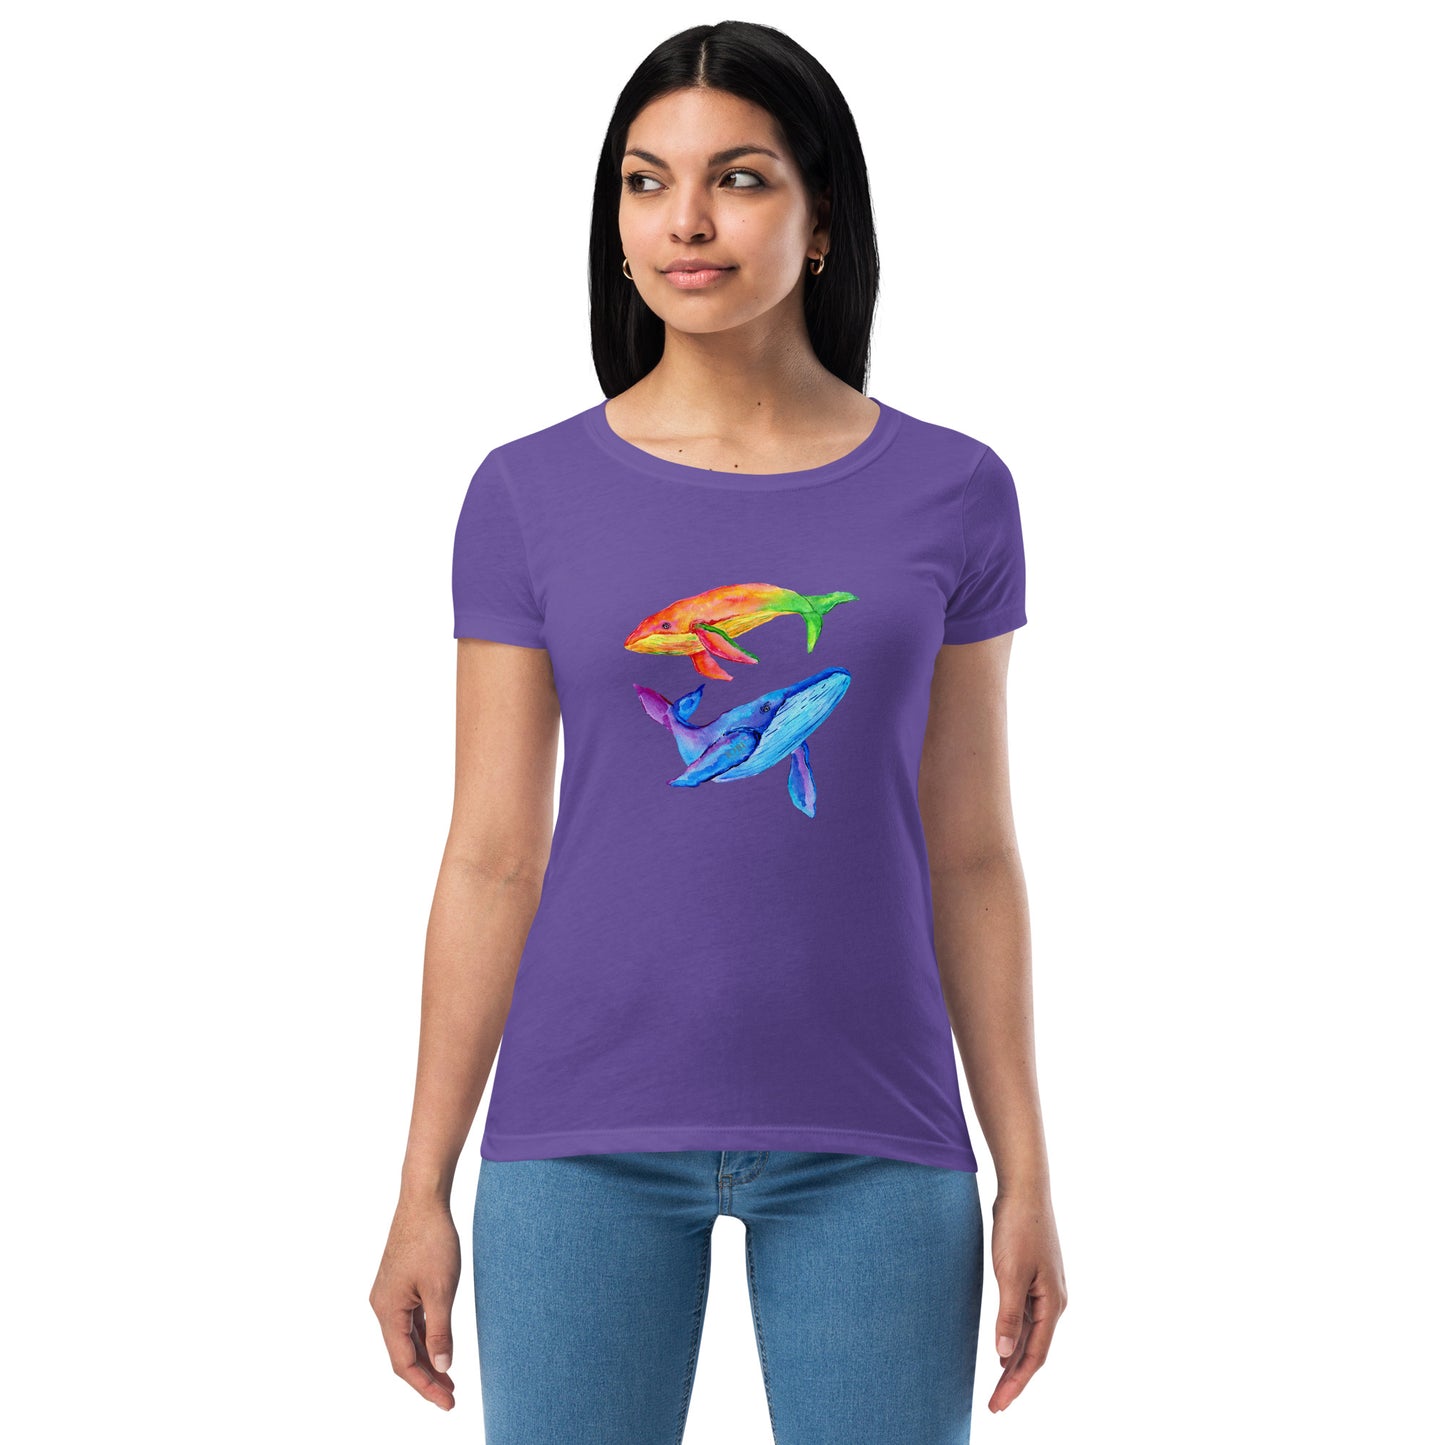 Women’s Fitted T-Shirt Super Soft & Stretchy Slim Fit Next Level Magical Whales Design by IOBI Original Apparel